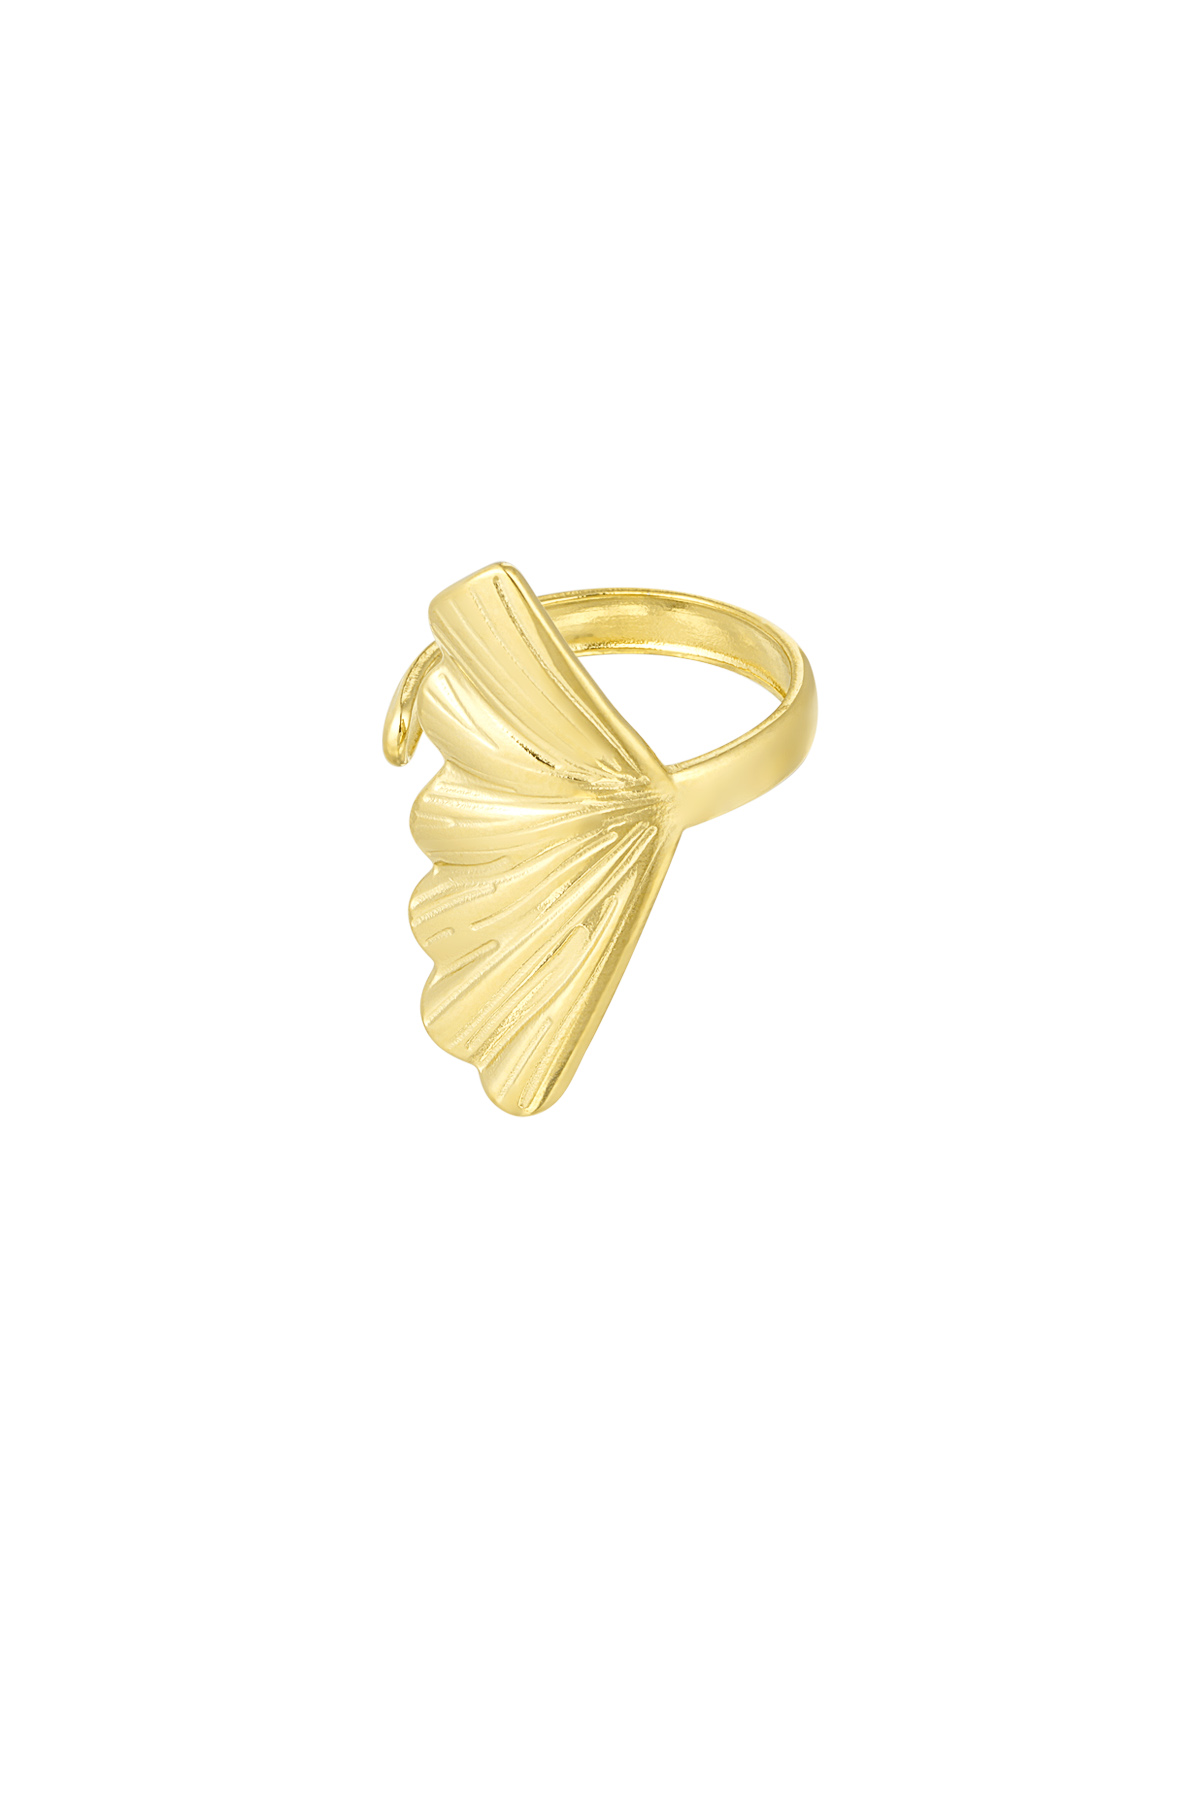 Ring Meerseite - Gold h5 